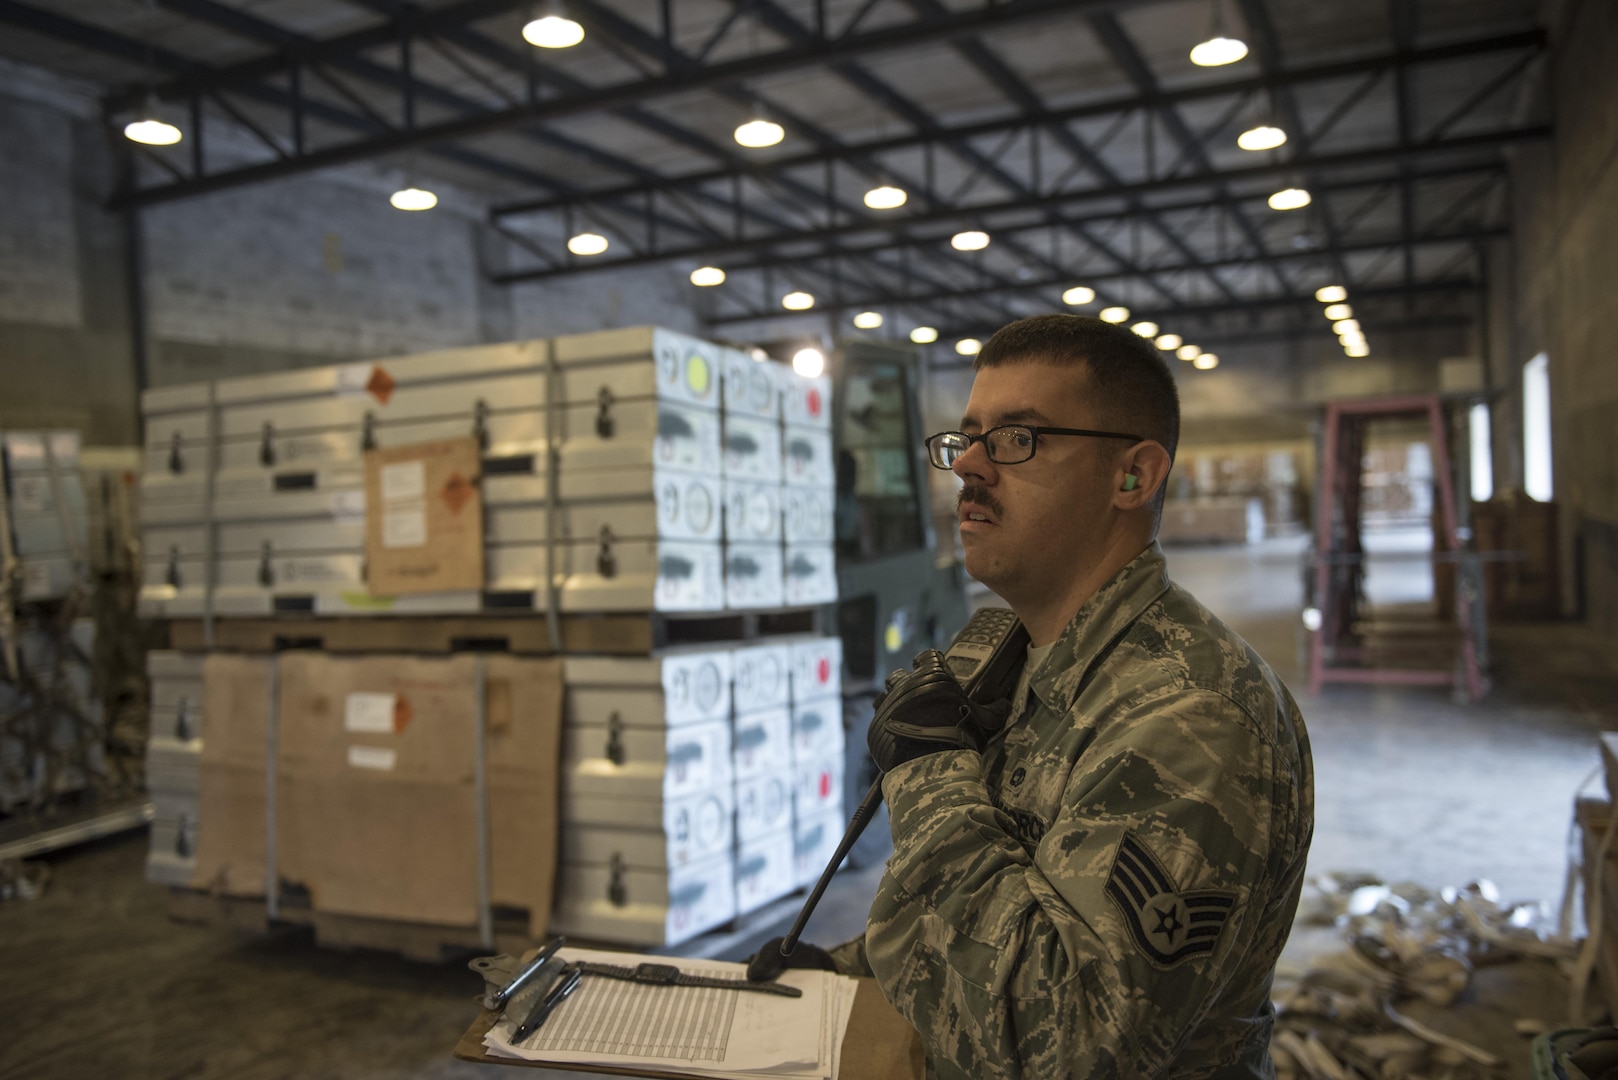 U.S. Air Force Staff Sgt. Beau Bridges reports the build time of a munitions package during a Tactical Ammunition Rapid Response Package exercise Dec. 6, 2016, at Kadena Air Base, Japan. During the TARRP exercise, munitions Airmen are timed and inspected during package builds for proficiency and safety. (U.S. Air Force photo by Senior Airman Omari Bernard/Released)